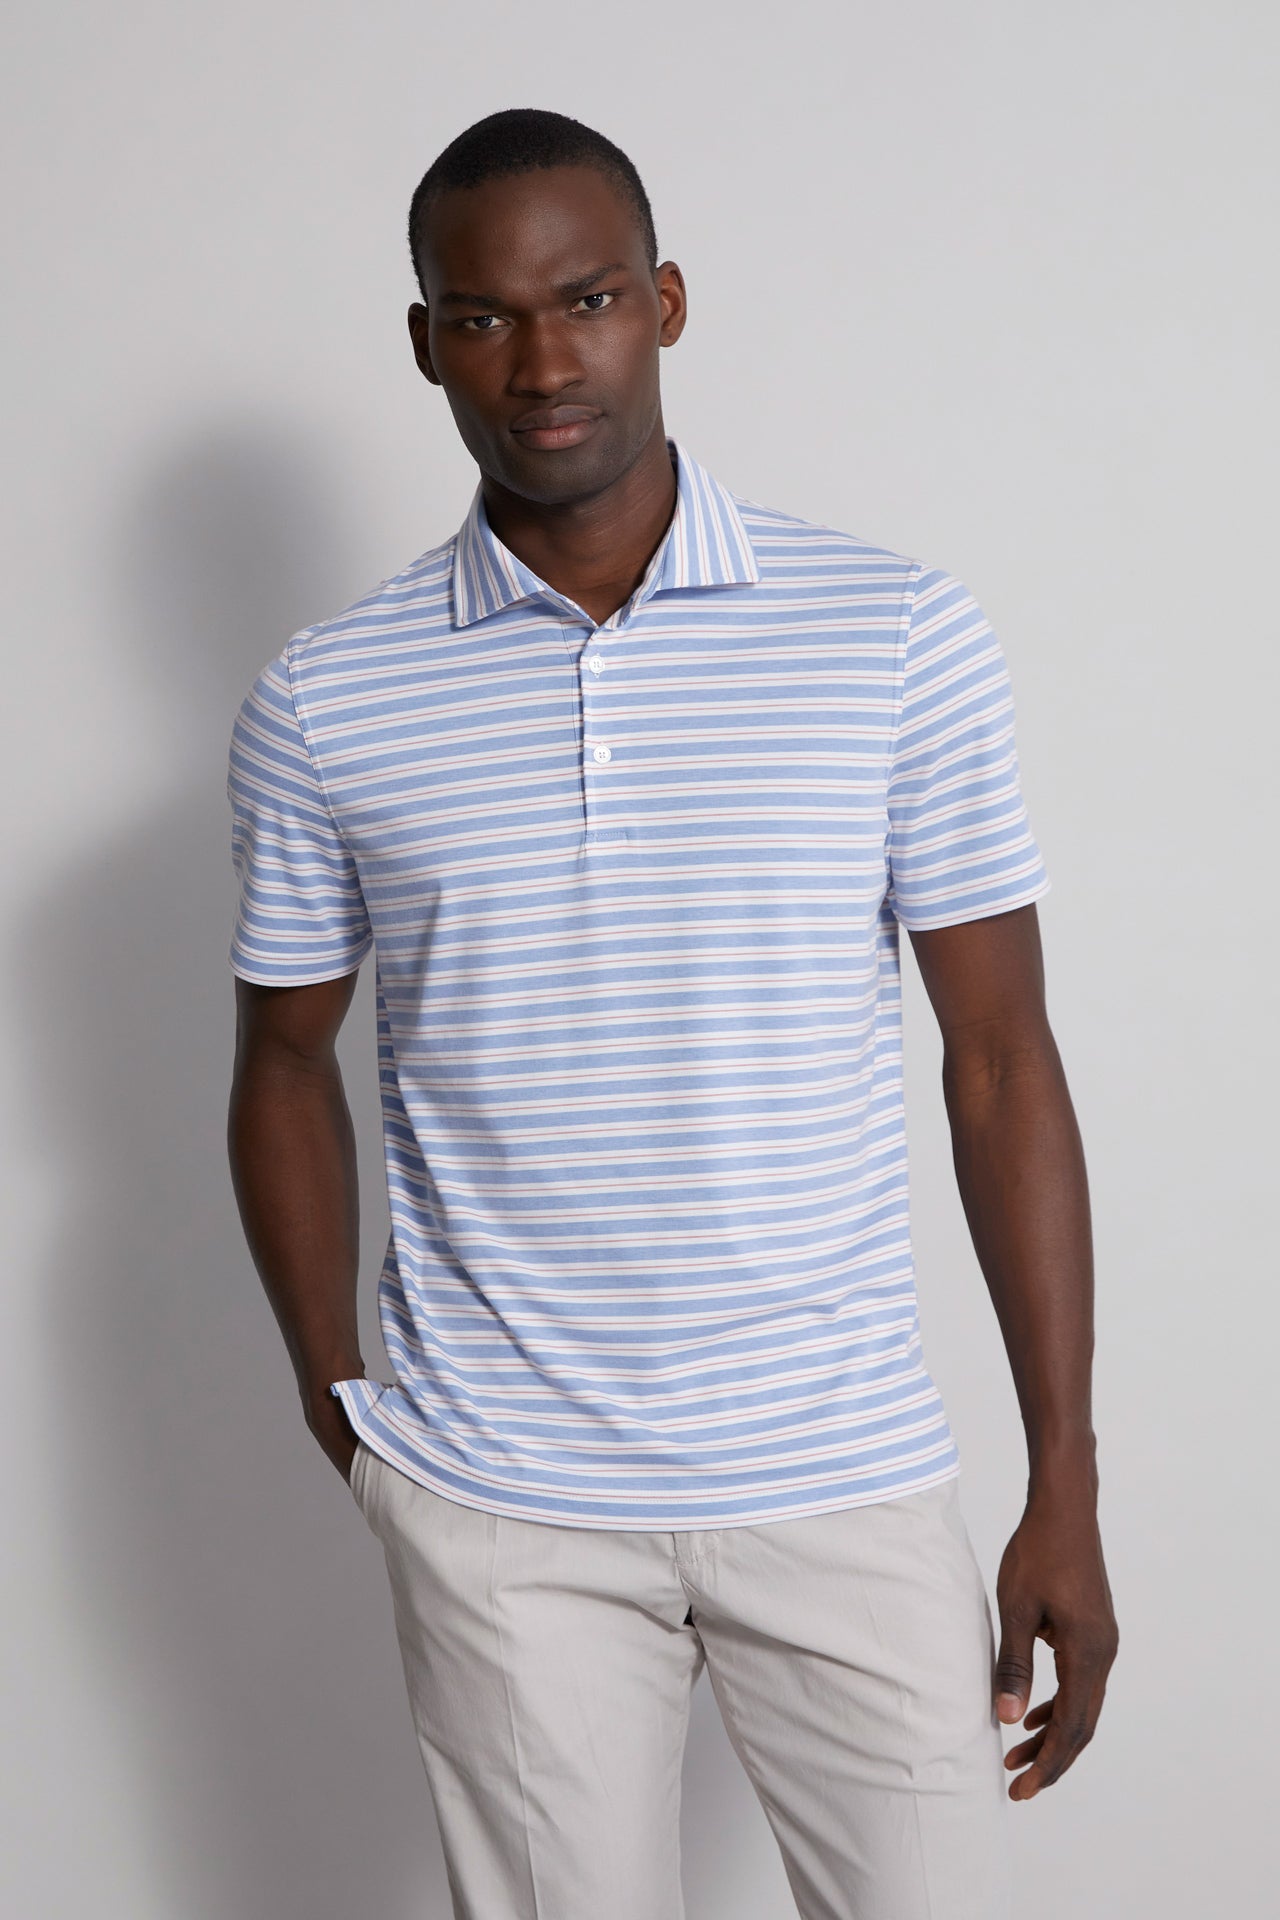 men's striped polo t-shirt grey and white - front view